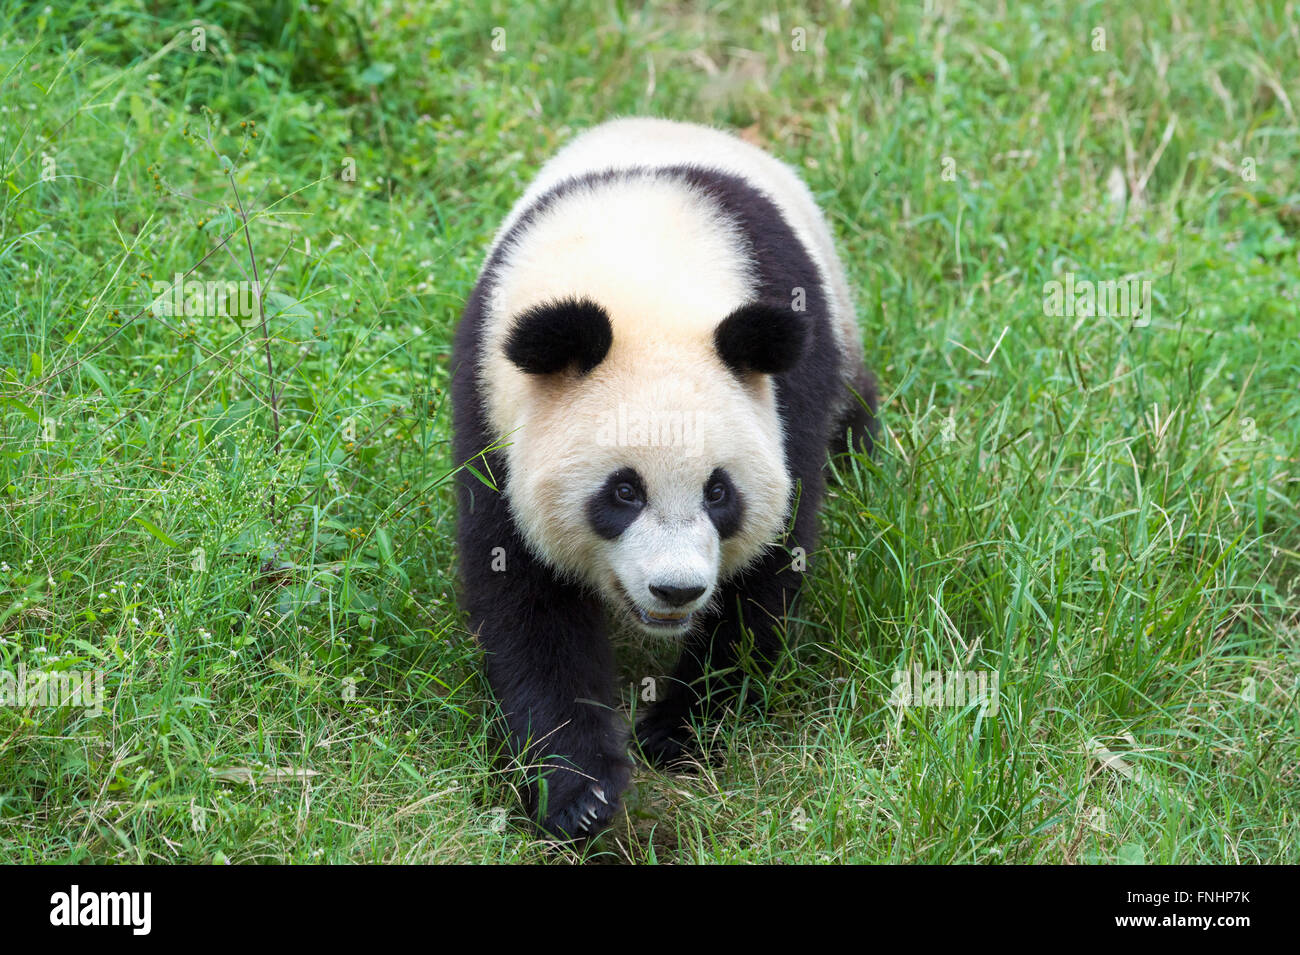 Giant Panda (Ailuropoda melanoleuca), China Conservation and Research Centre for the Giant Pandas, Chengdu, Sichuan, China Stock Photo